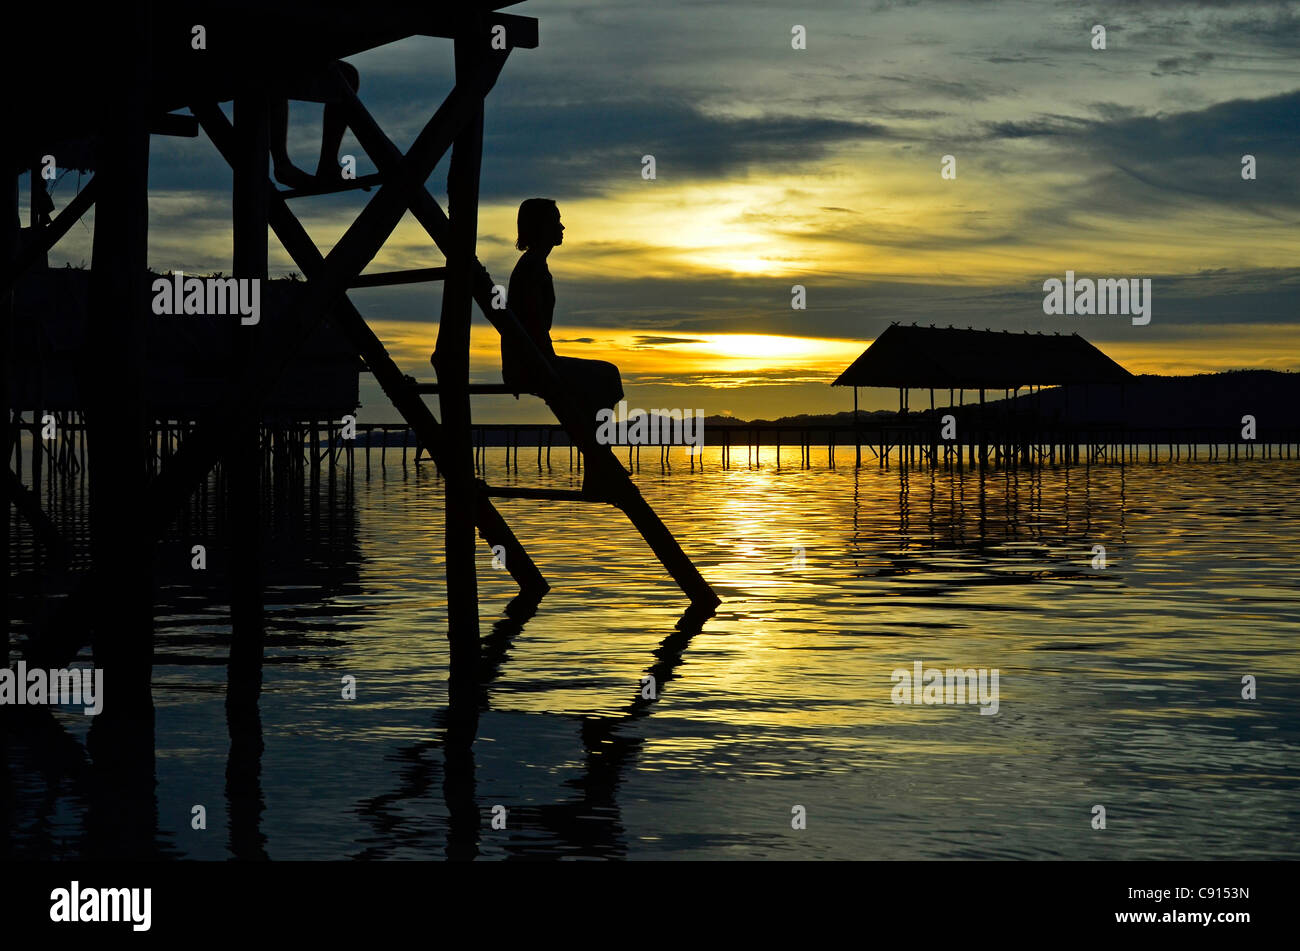 Woman silhouetted at sunset, Kri Eco Resort, Raja Ampat islands of Western Papua in the Pacific Ocean, Indonesia. Stock Photo